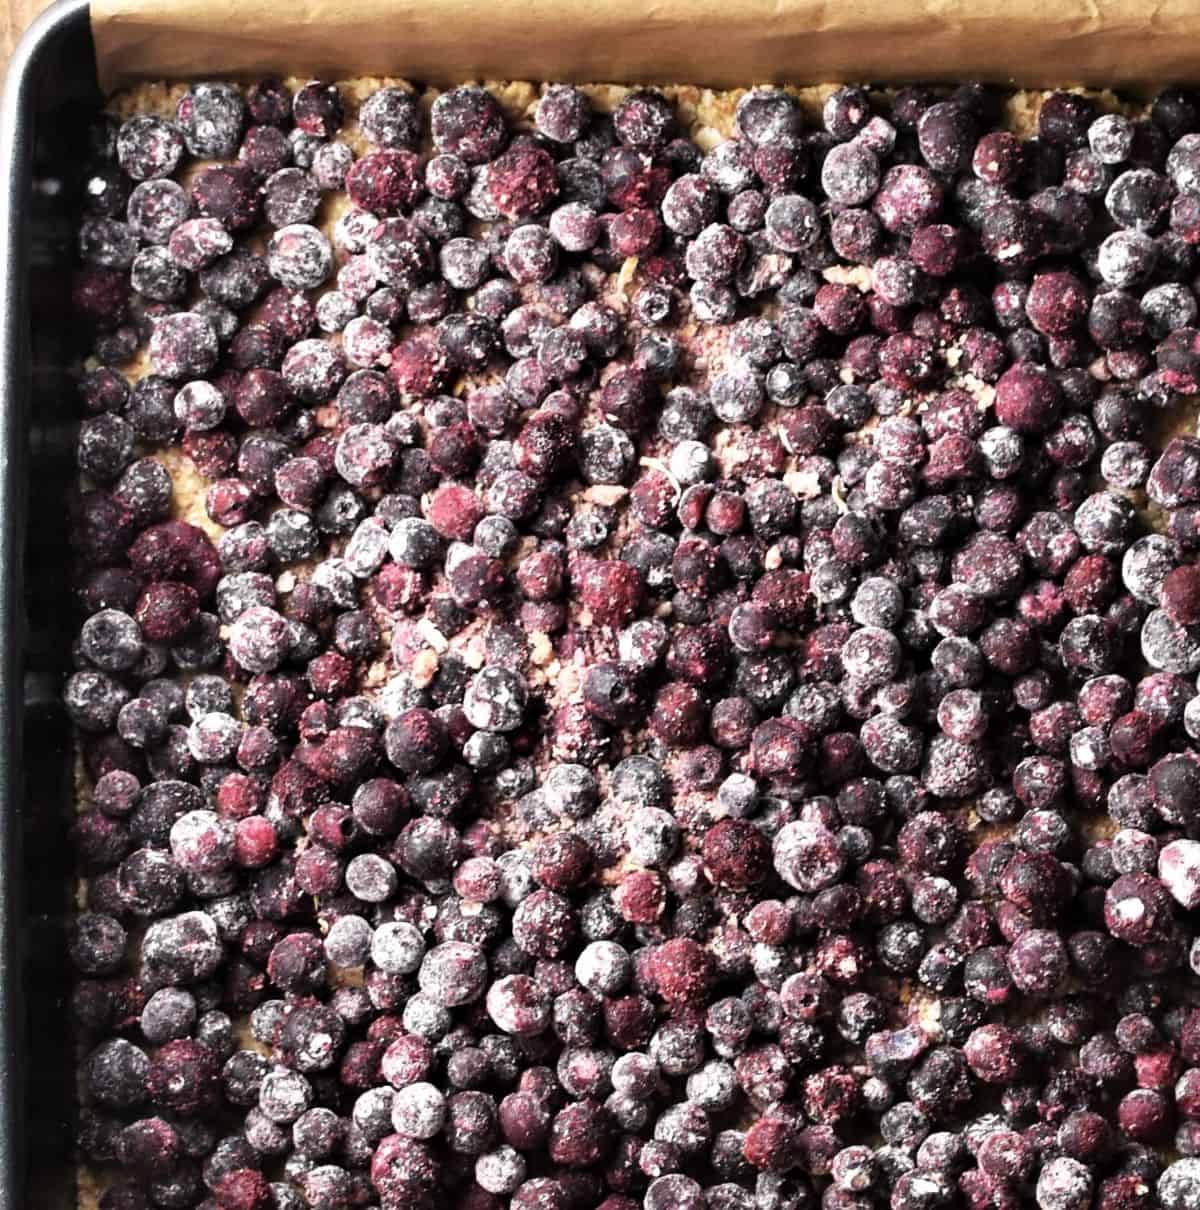 Layer of blueberry mixture spread in pan.